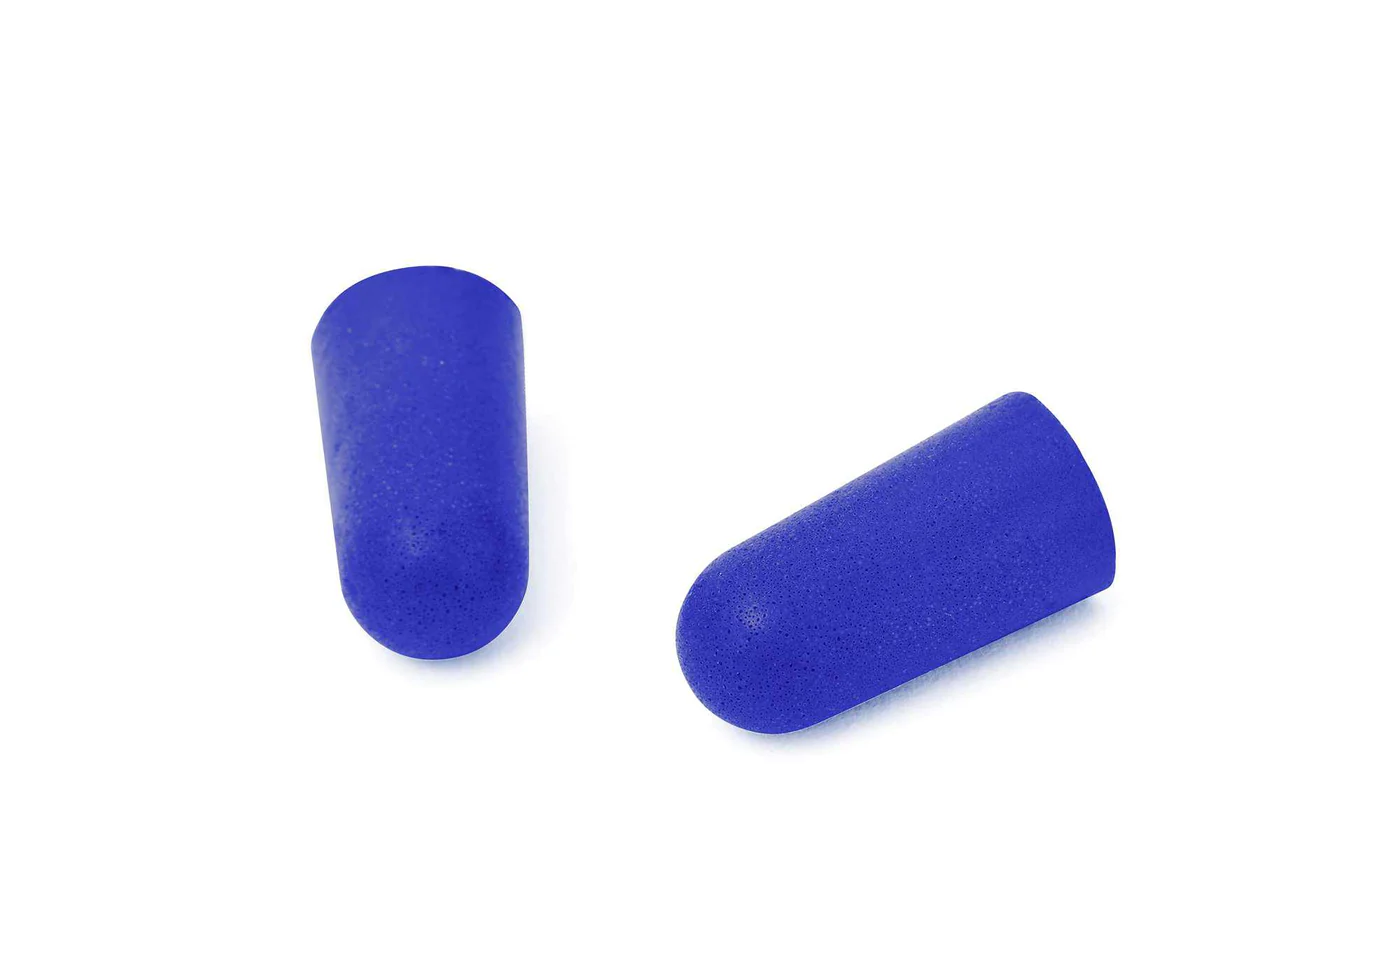 Two blue earplugs with a unique bell shape design made from slow-release foam for napping.